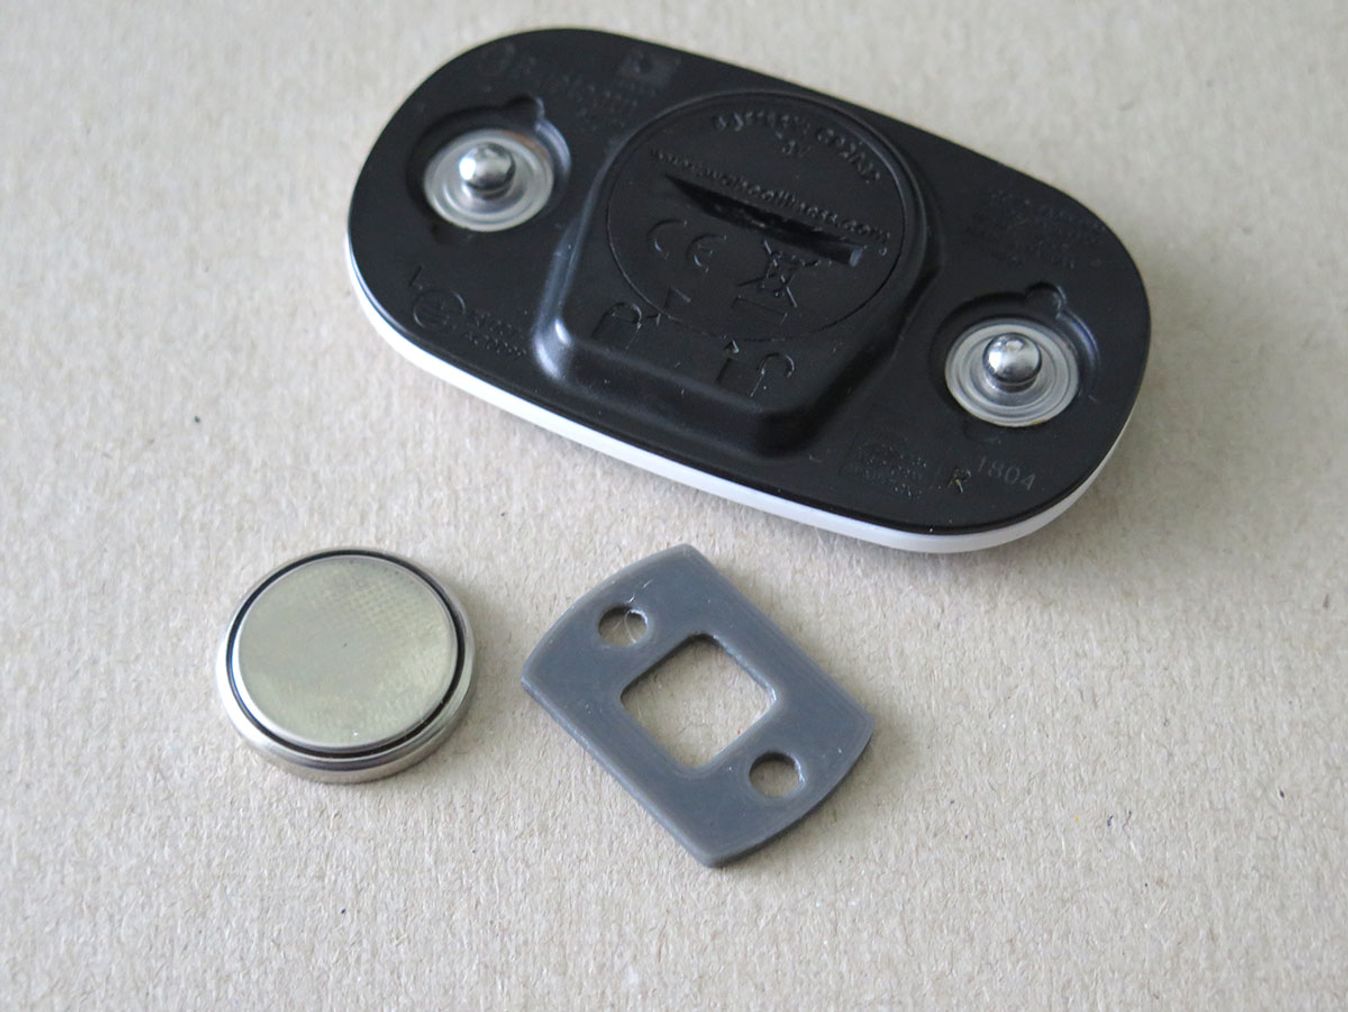 3D printed battery compartment tool for when you can't find a coin to open it